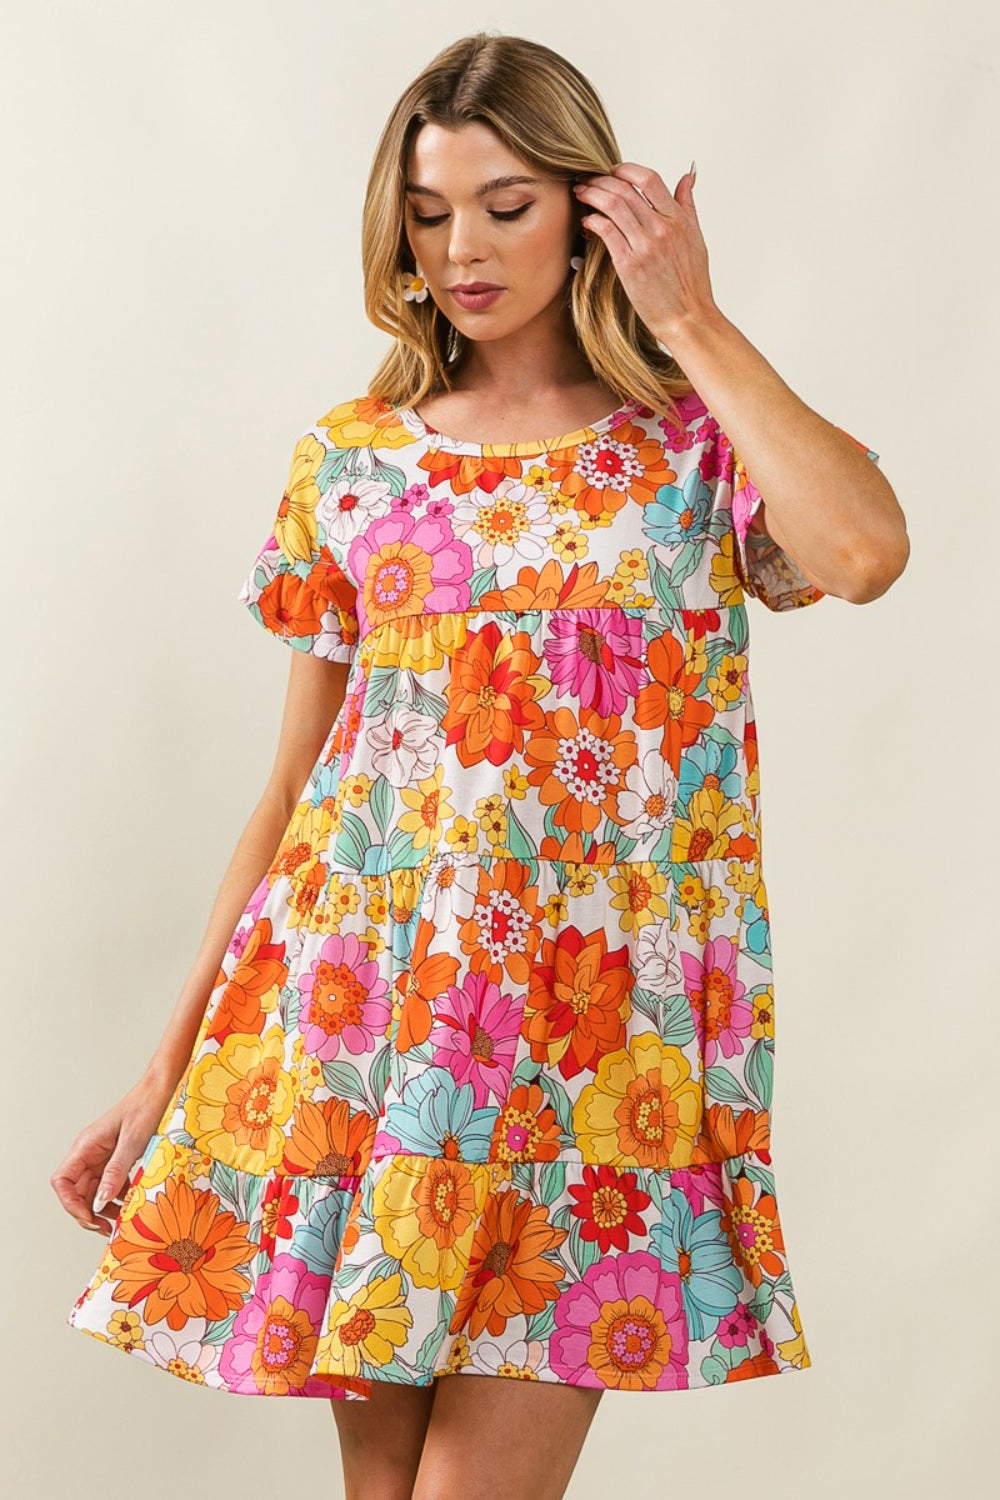 Blue Zone Planet |  BiBi Floral Short Sleeve Tiered Dress BLUE ZONE PLANET